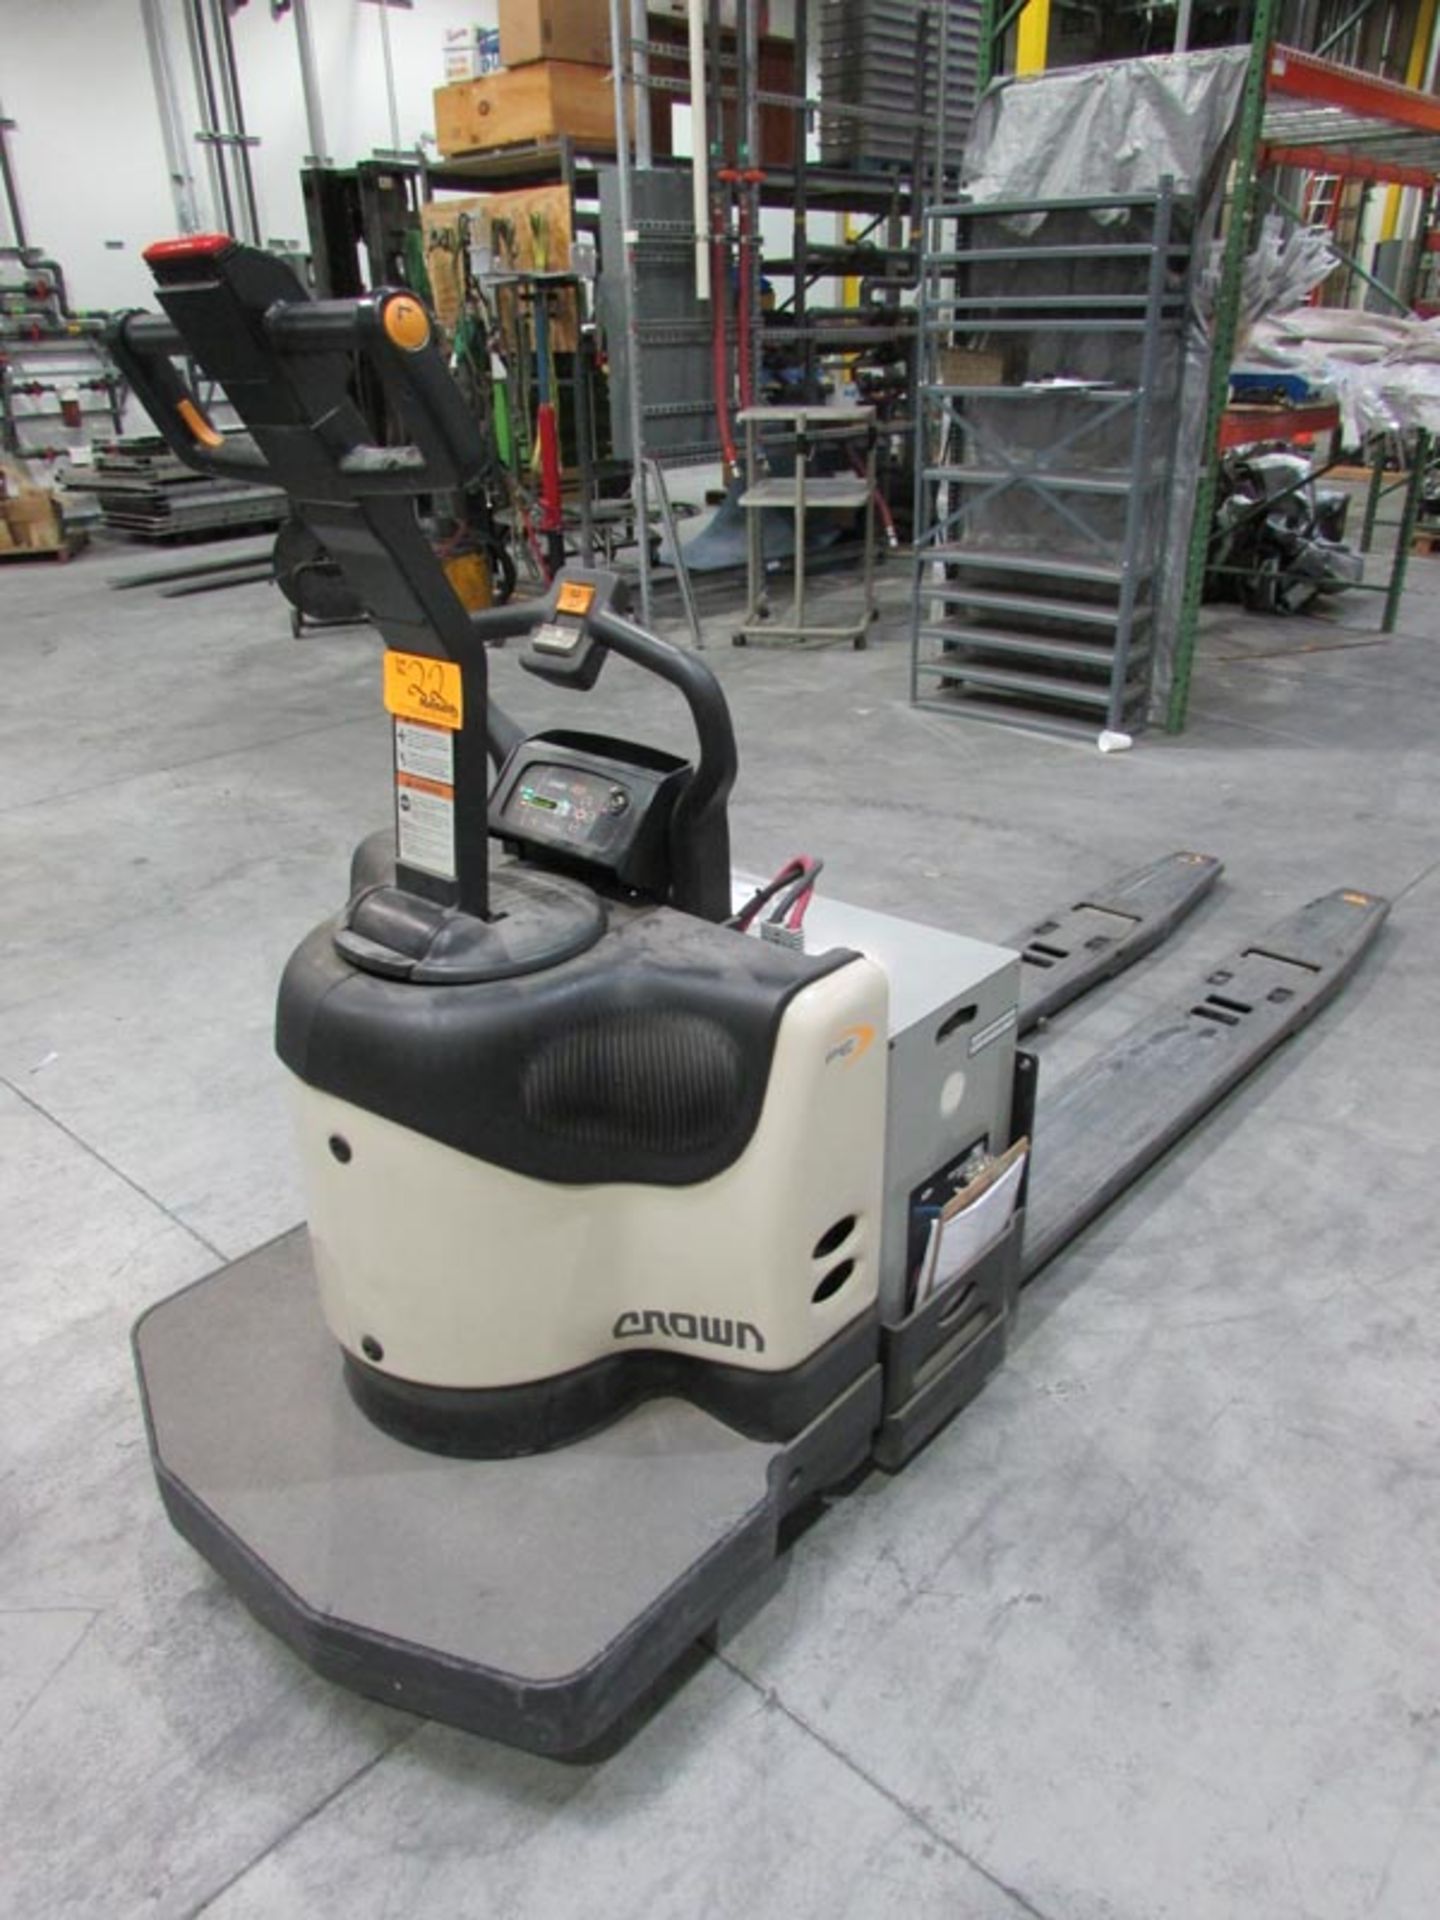 Crown Mdl: PE4500-80 24V Electric Pallet Jack 8,000Lbs Cap, 840Lbs Truck Weight, 1520Lbs Truck